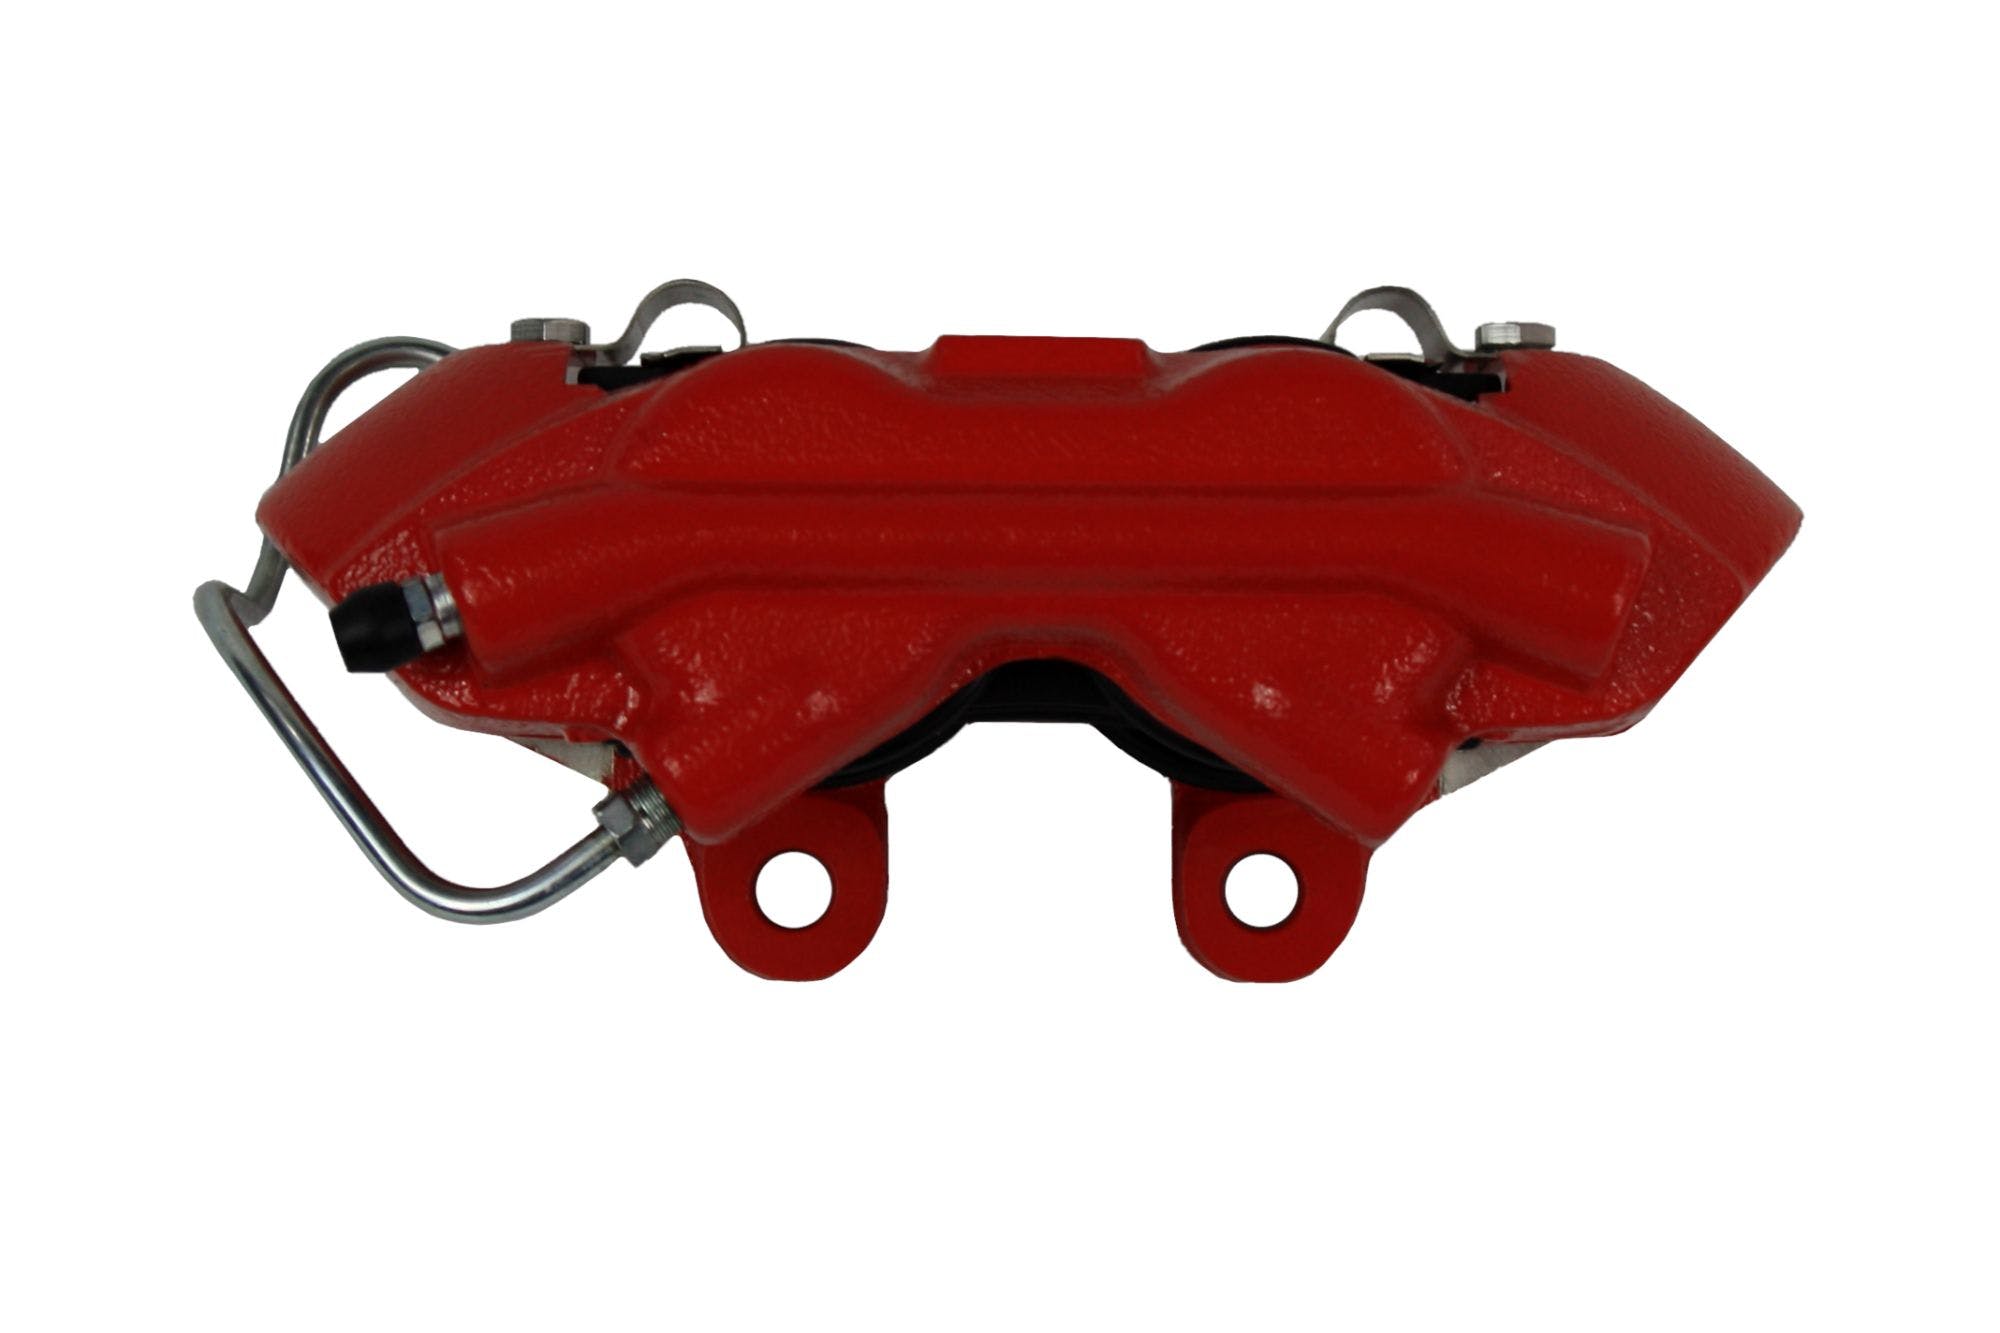 LEED Brakes RFC2001SMX Mopar A Body MaxGrip XDS Conversion Kit - Spindle Mount - Red Powder Coat